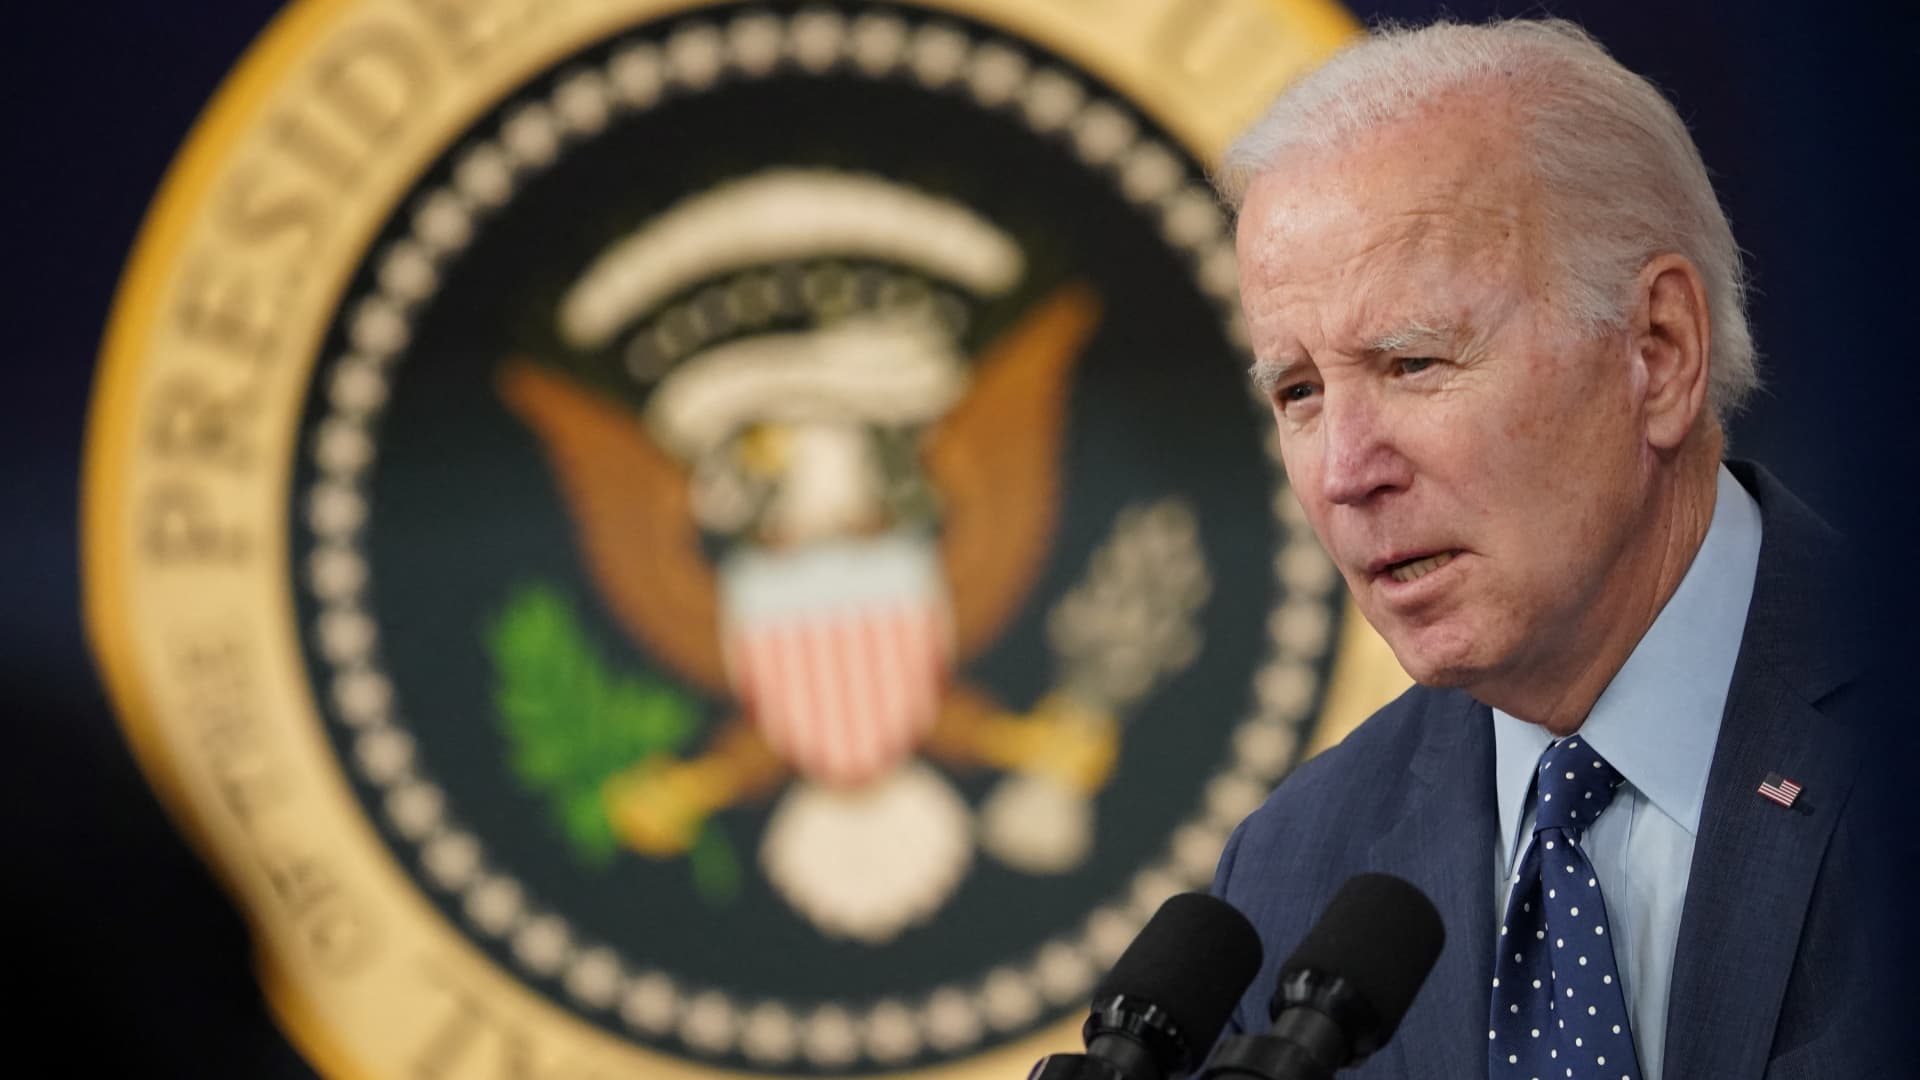 Biden says three recently downed aerial objects were not linked to Chinese spy program